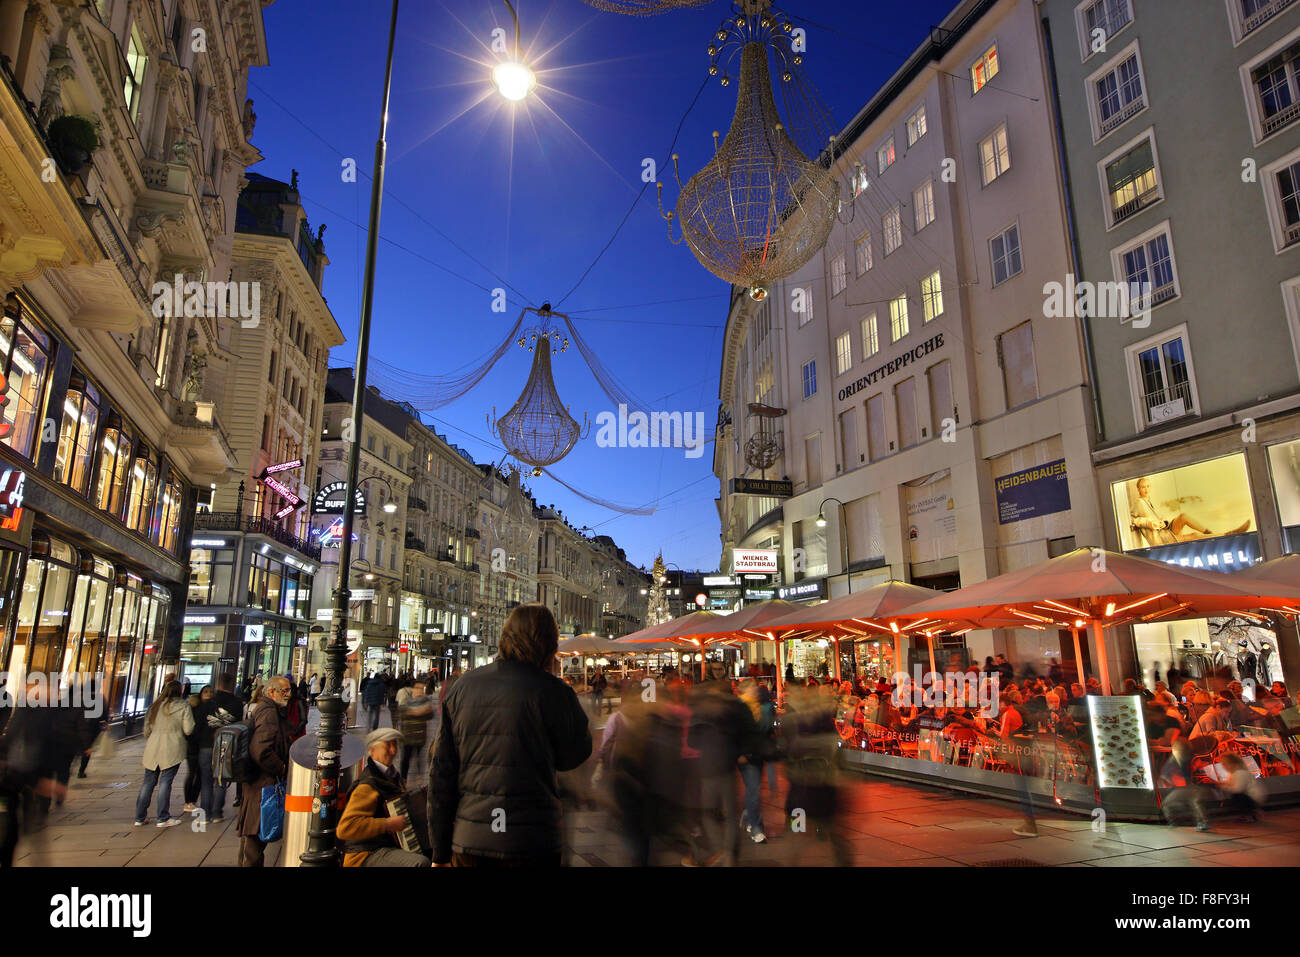 Graben, one of the main commercial streets of Vienna, Austria. Stock Photo